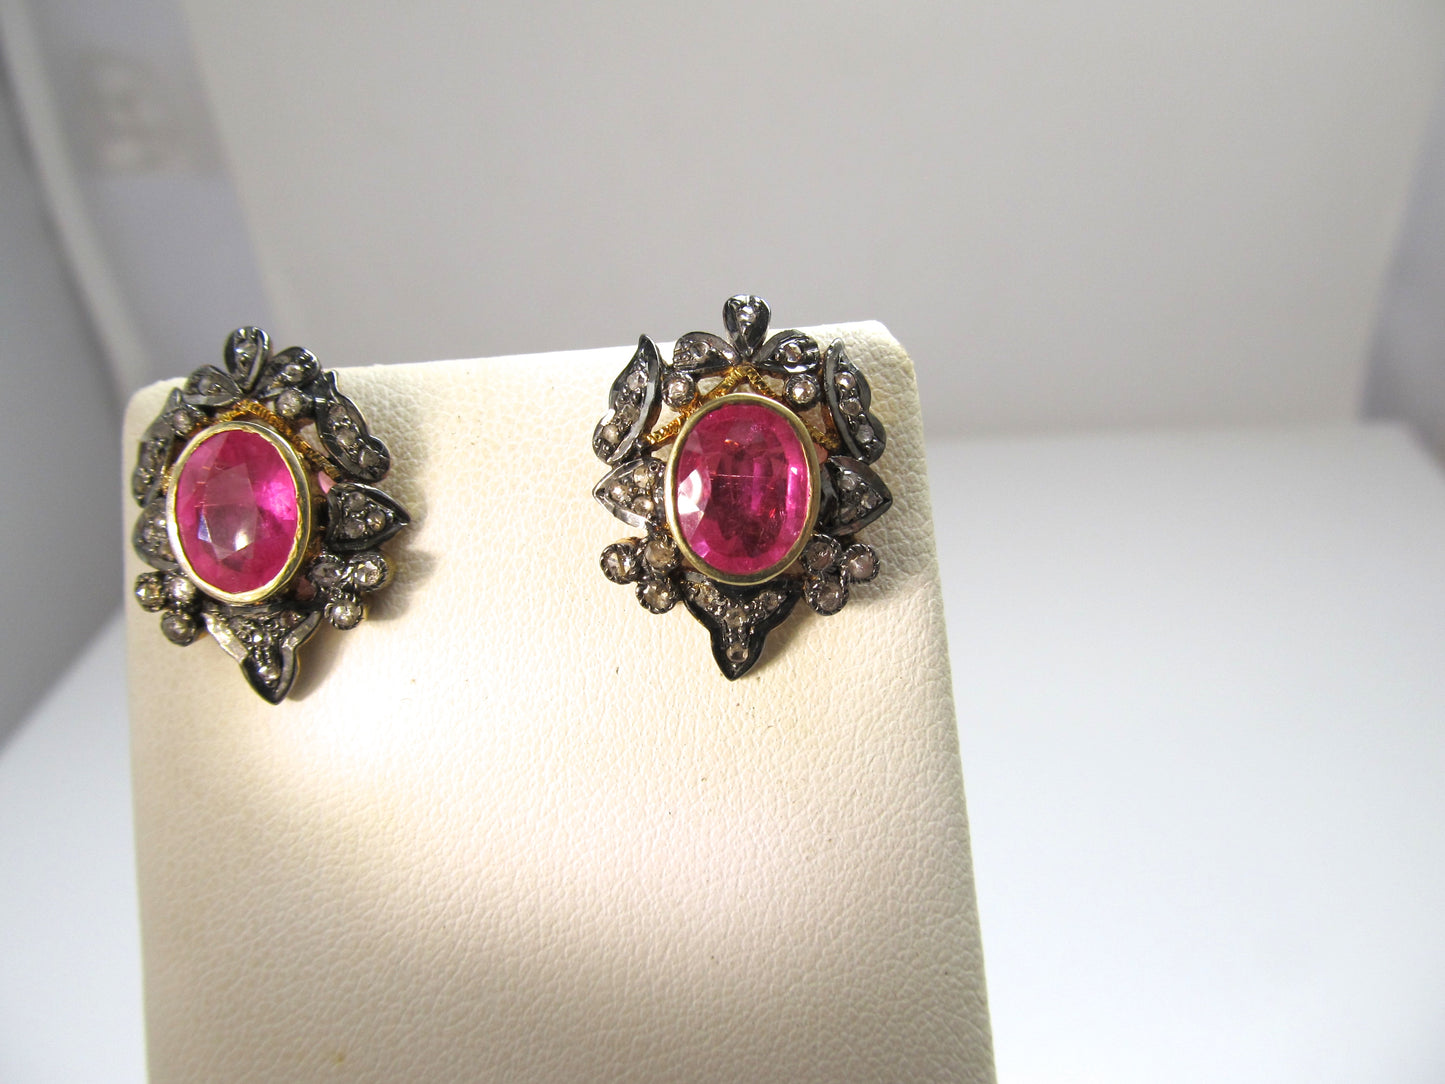 18k and silver earrings with pink tourmalines and rose cut diamonds